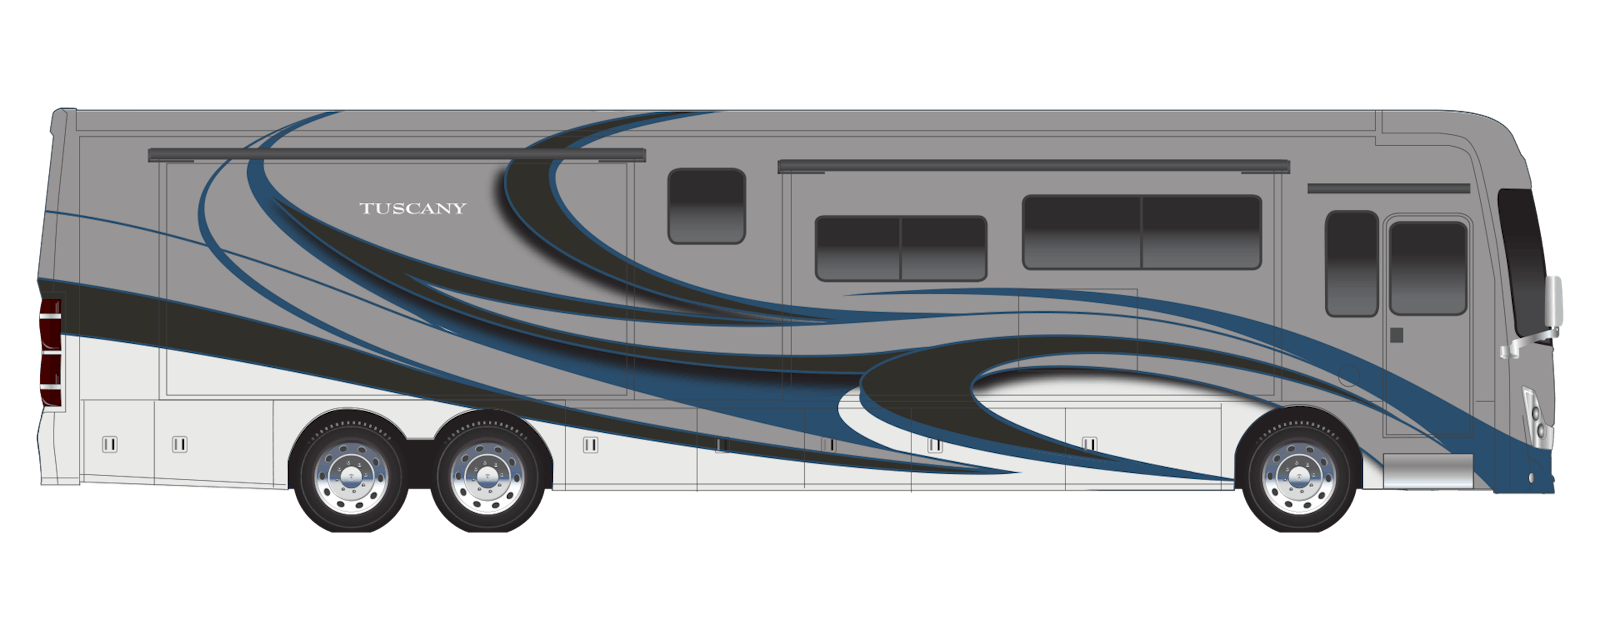 2022 Thor Tuscany Class A Diesel Pusher RV Grandview Full Body Paint Exterior Artwork